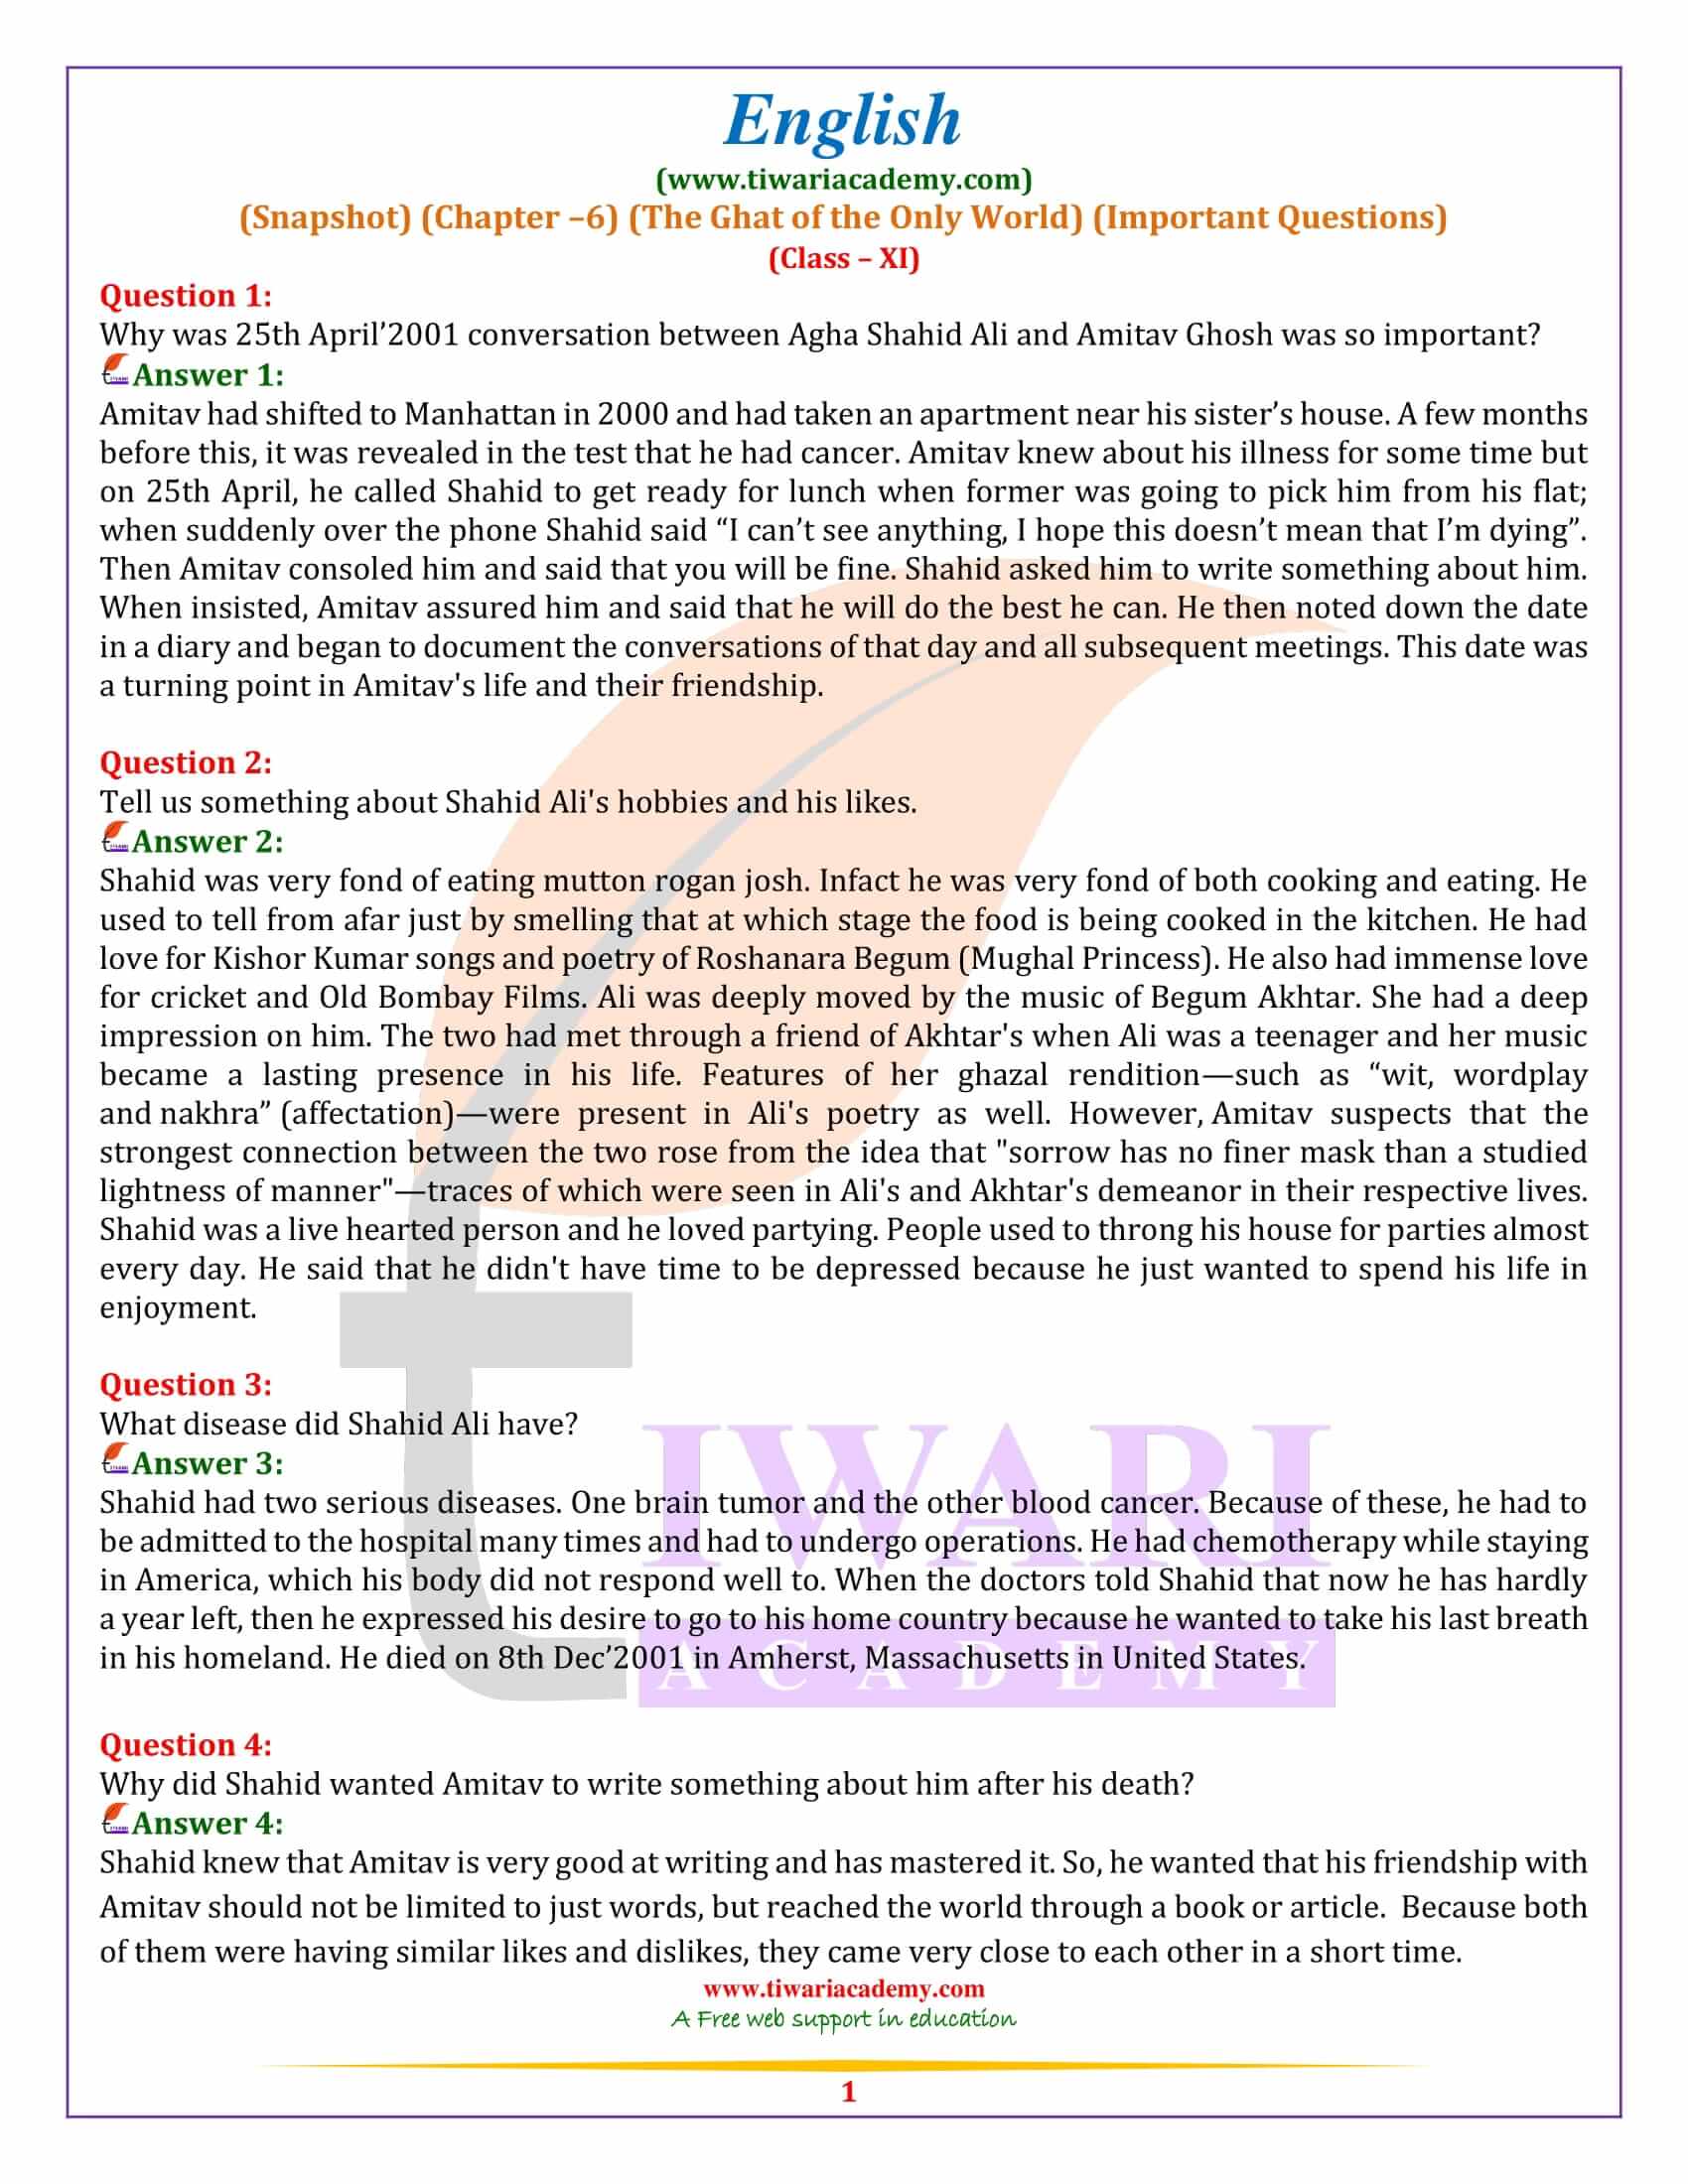 Class 11 English Snapshots Chapter 6 Extra Questions